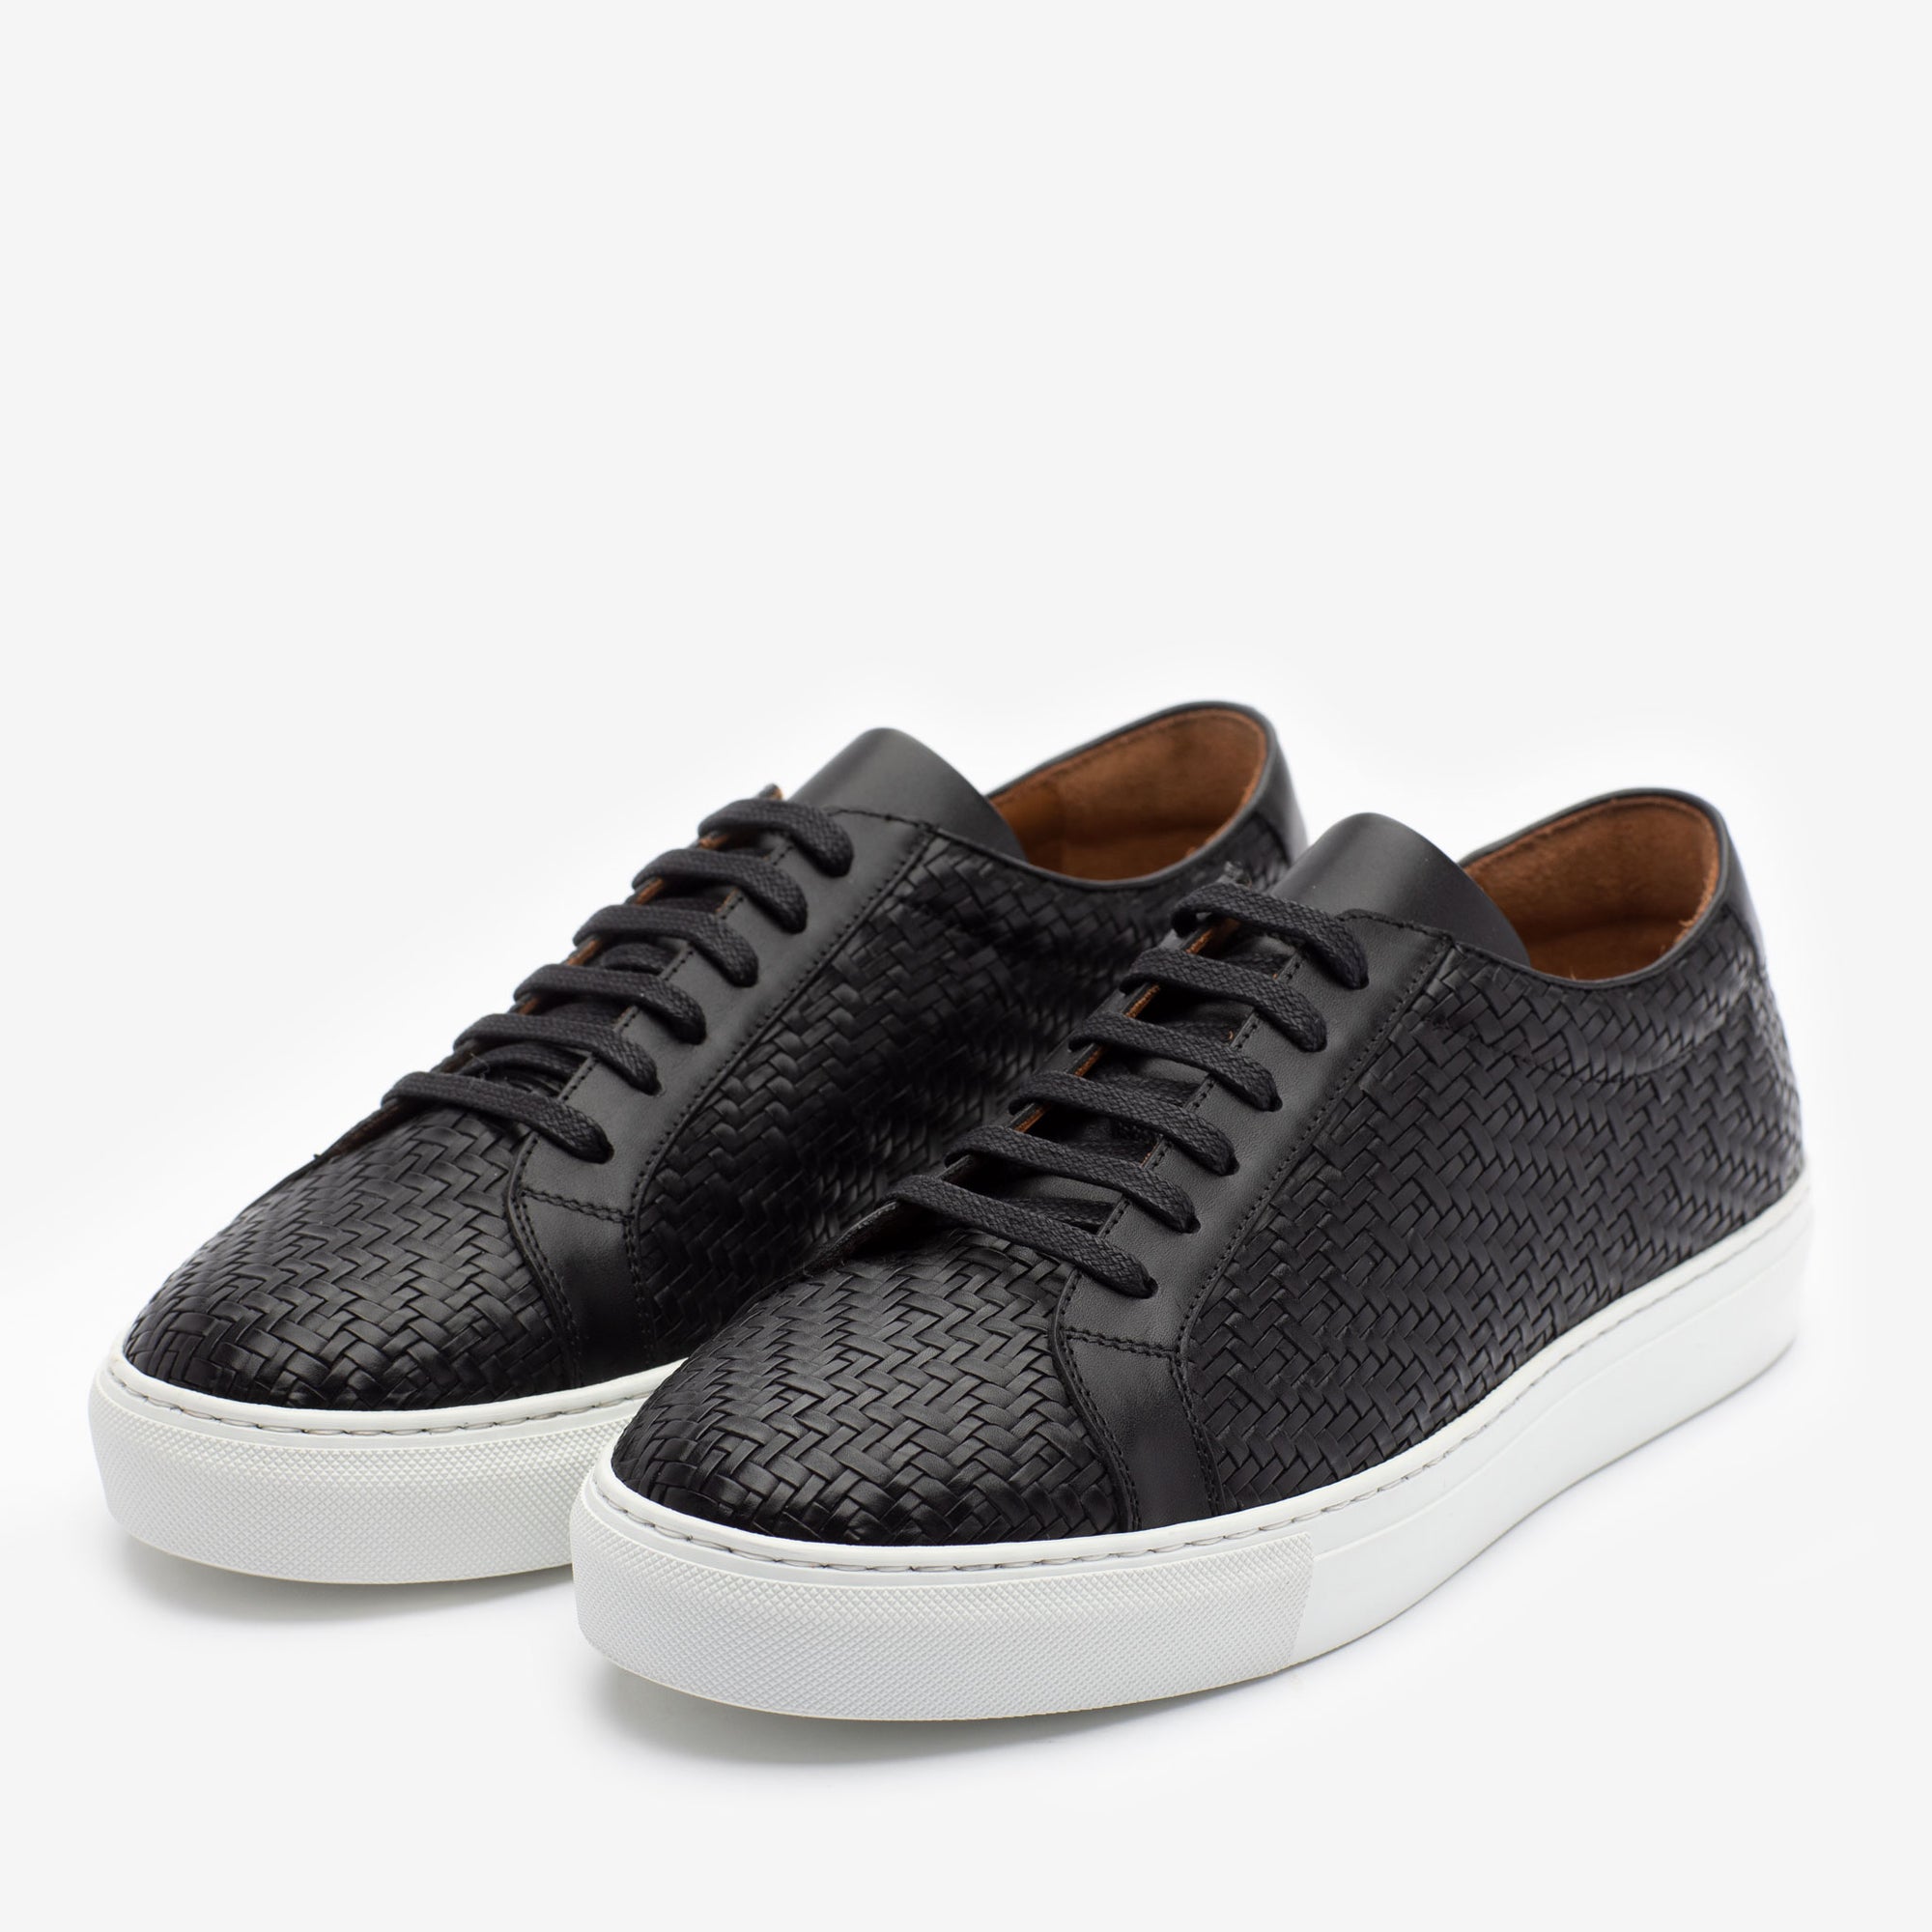 The Black Woven Leather | TAFT